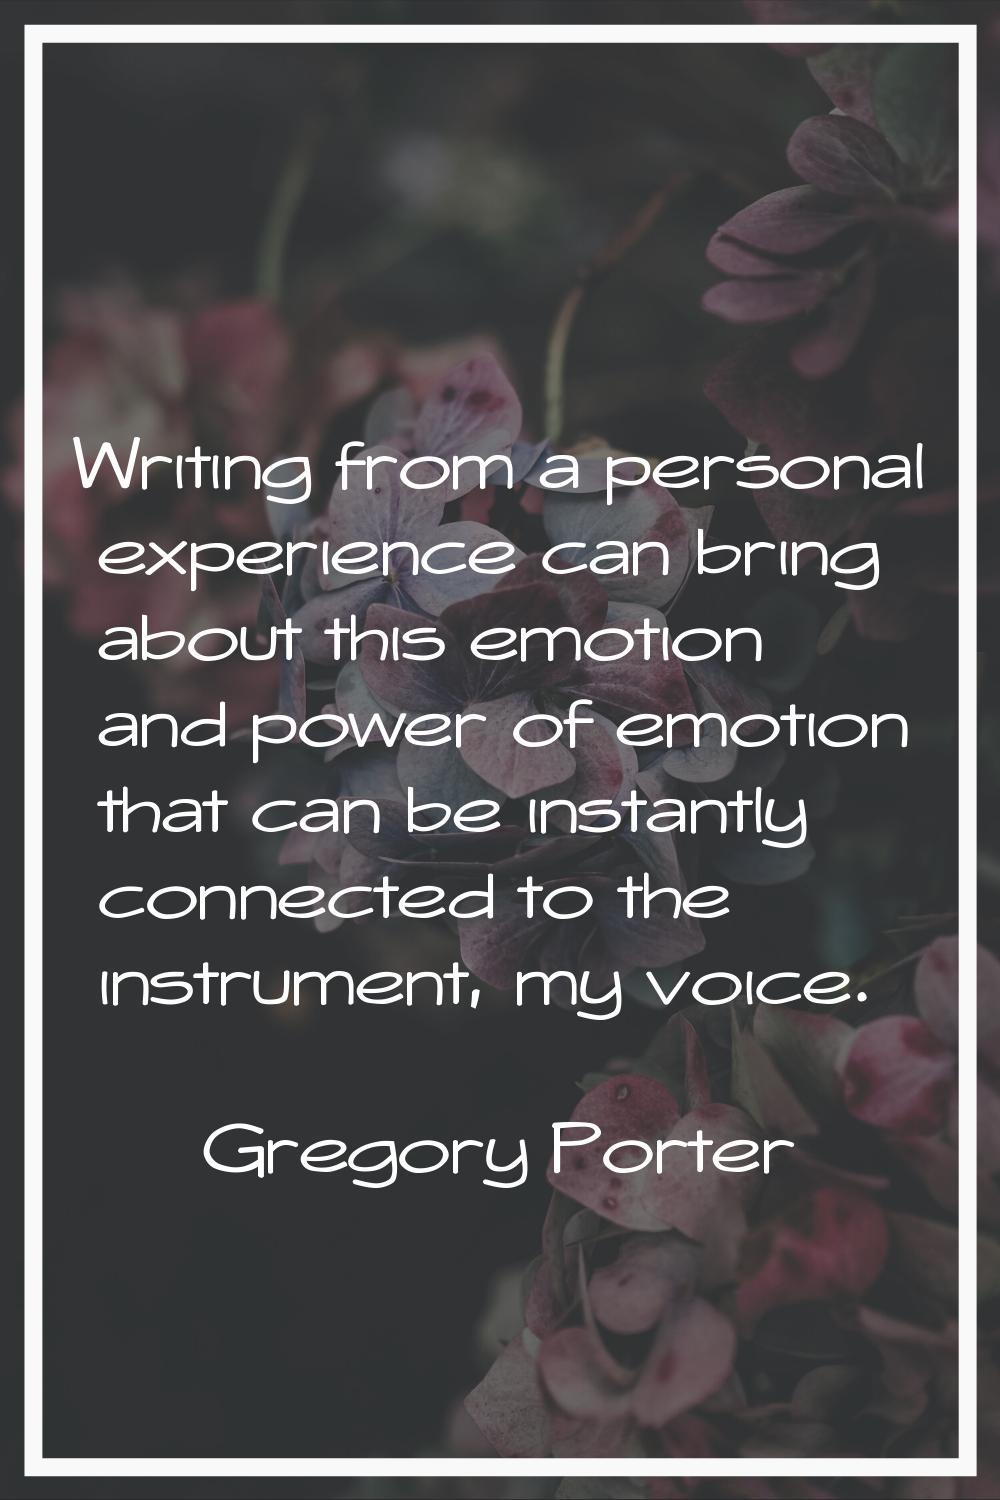 Writing from a personal experience can bring about this emotion and power of emotion that can be in